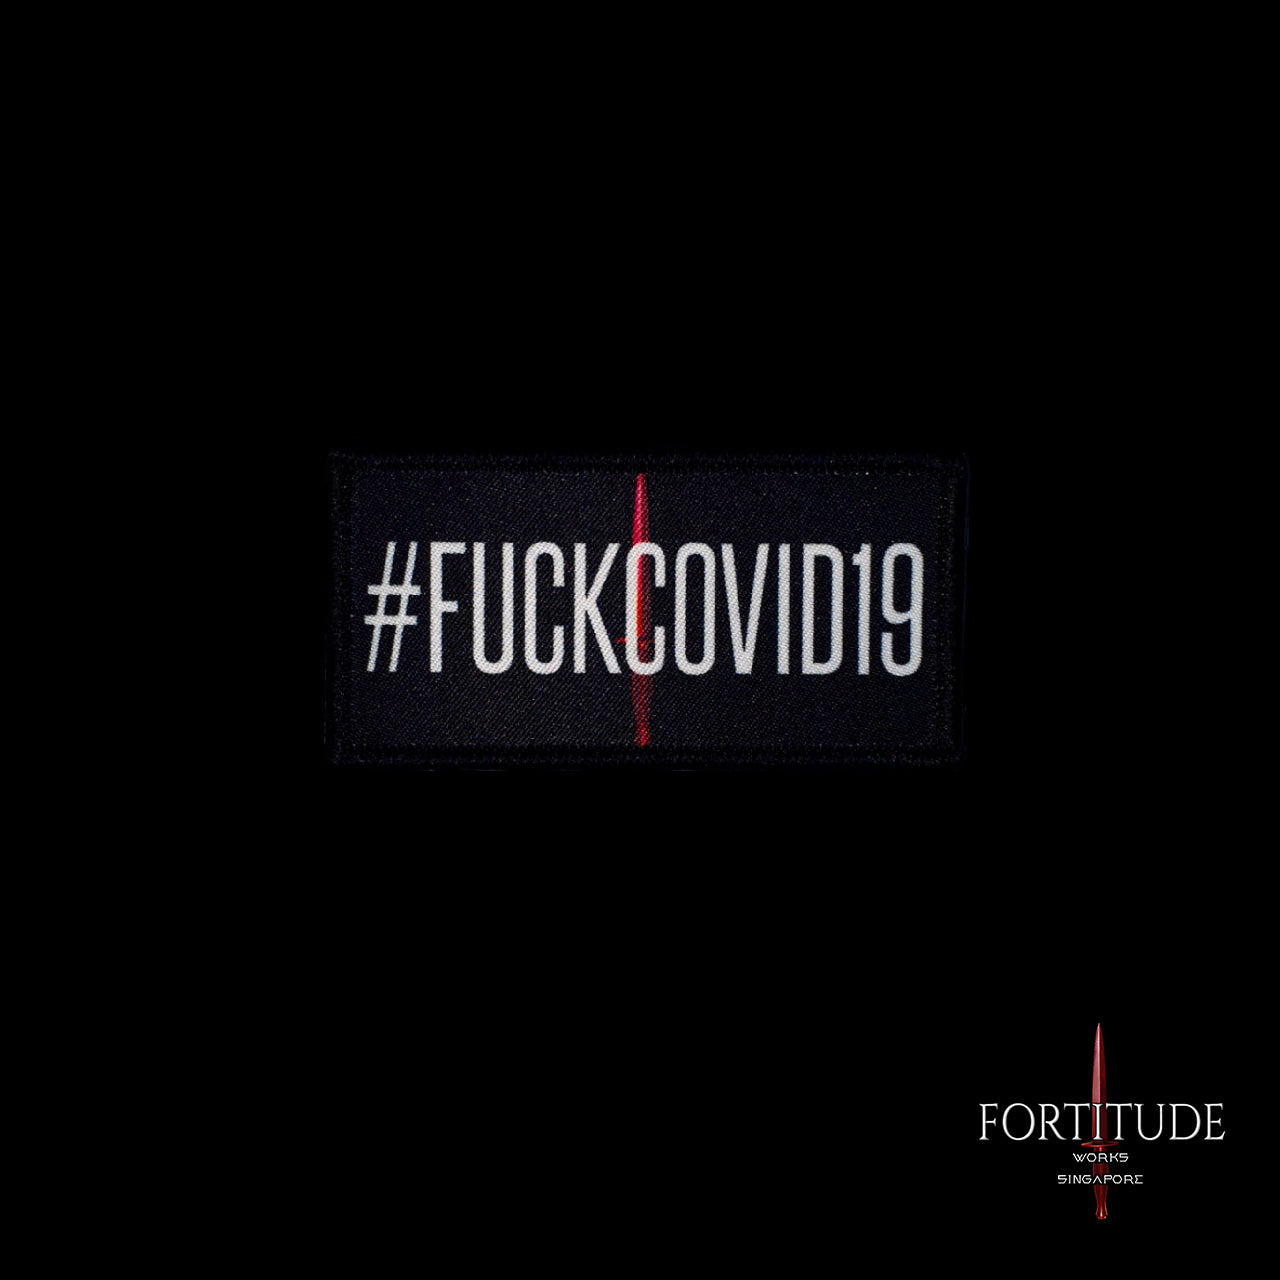 #FUCKCOVID19 PATCH - FORTITUDE WORKS SINGAPORE